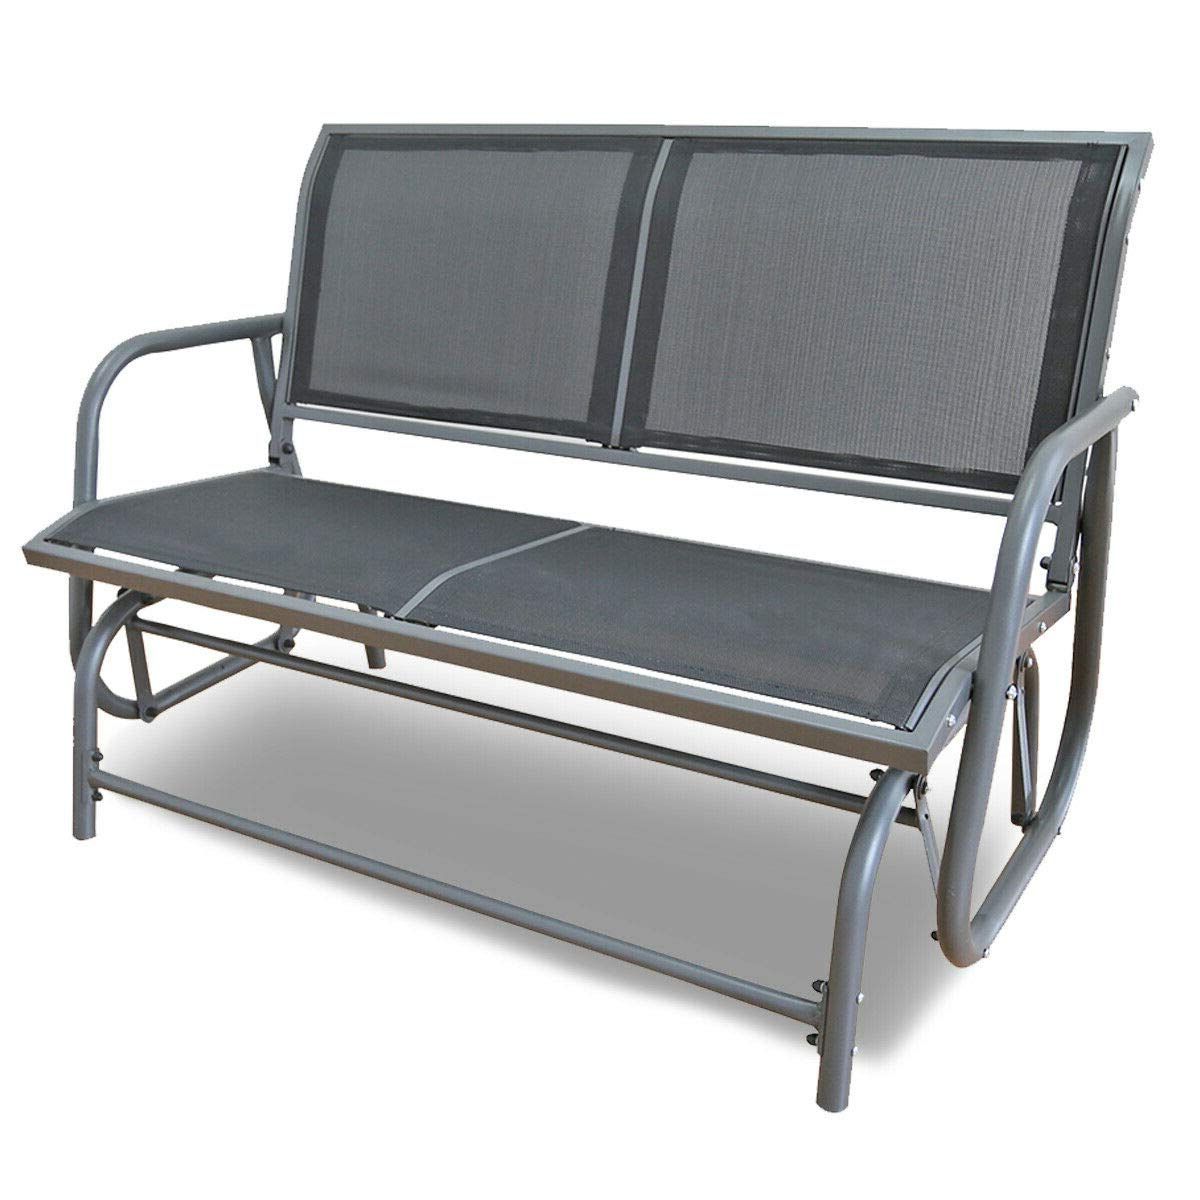 Amazon : Grey Patio Swing Glider Bench For 2 Persons Regarding Most Recent Steel Patio Swing Glider Benches (View 3 of 30)